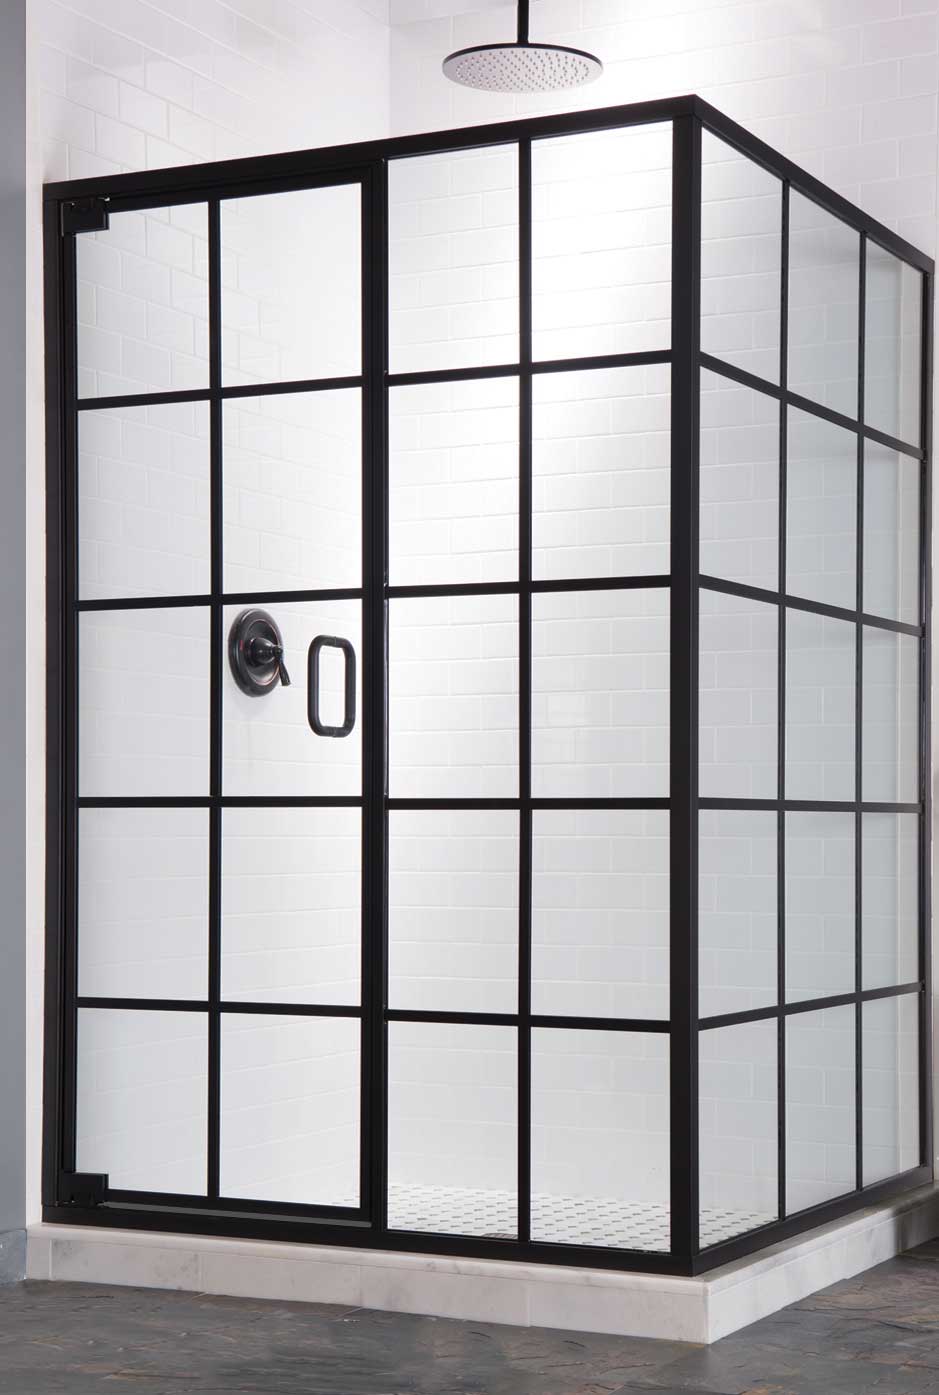 Fully-framed shower enclosure with Tudor-style square lattice pattern. Black pull handle and matching shower hardware.